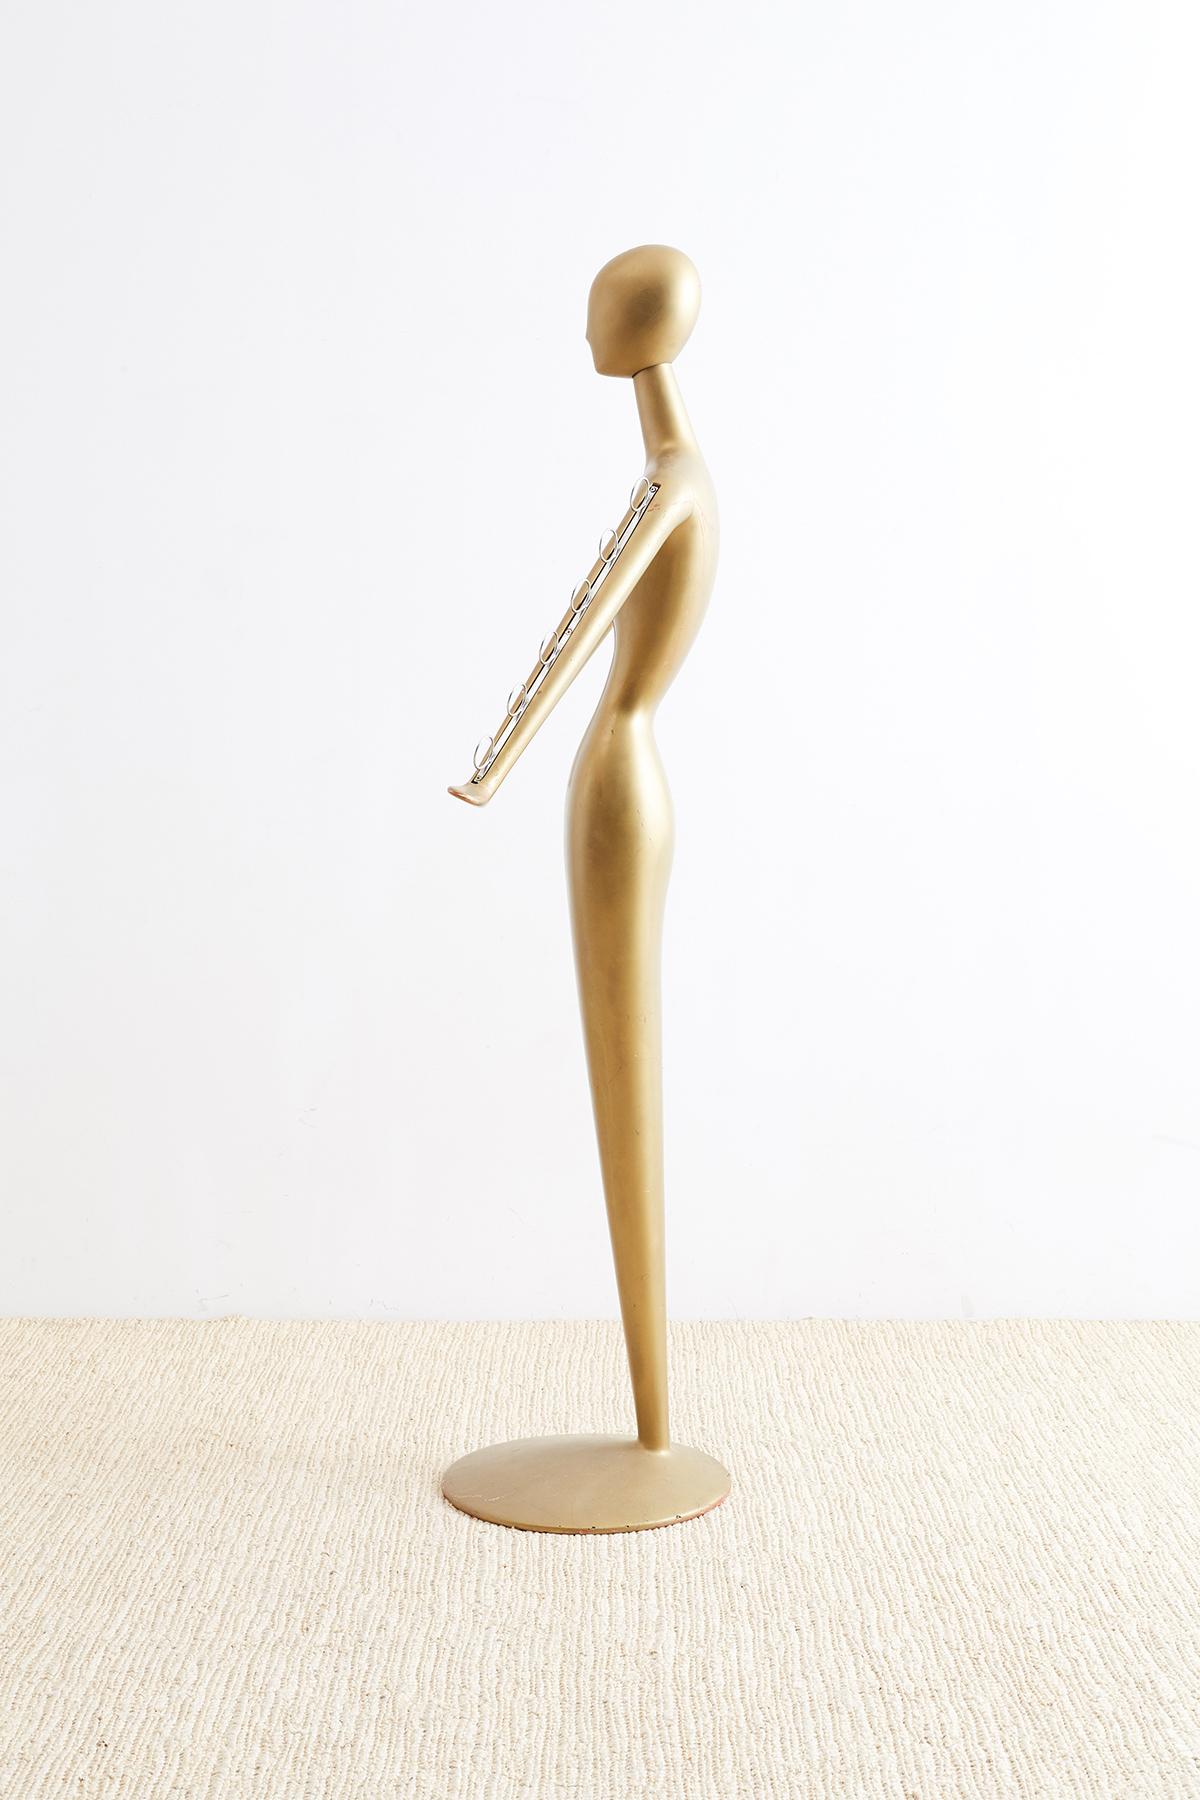 Hand-Crafted Abstract Tulip Form Female Mannequin Display Sculpture For Sale